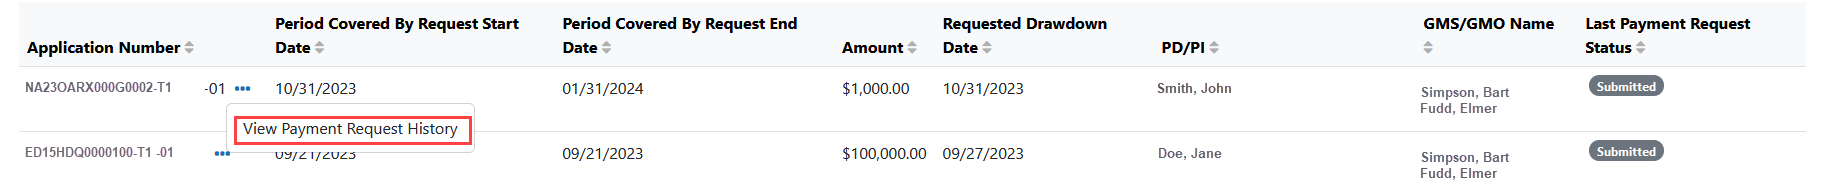 View Payment Request History is available in the action menu 